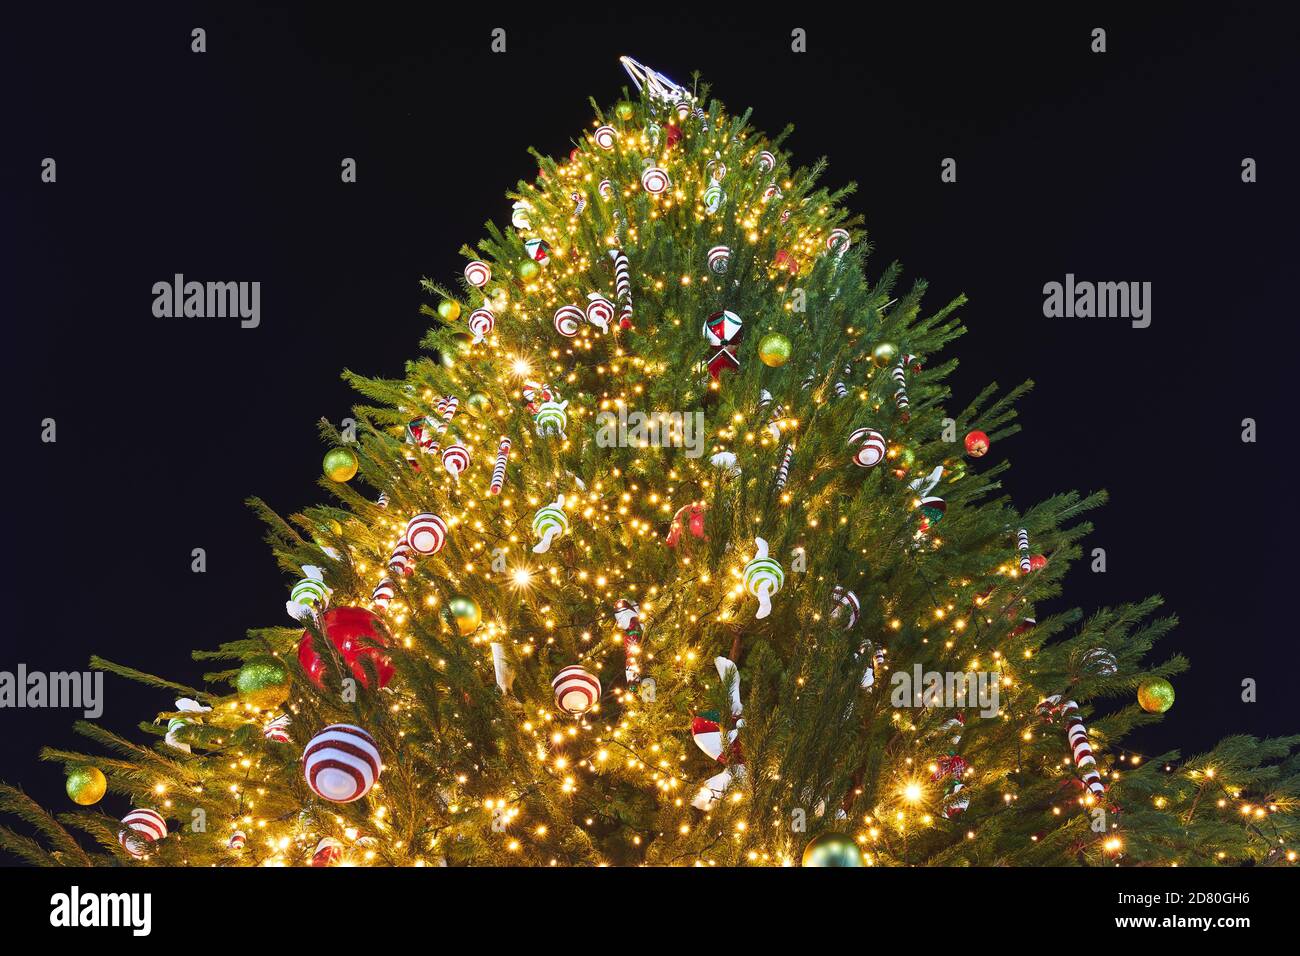 Beautiful Christmas Tree decorated with garlands, Christmas candies and different colorful baubles. New Year decorations. Black background. Stock Photo